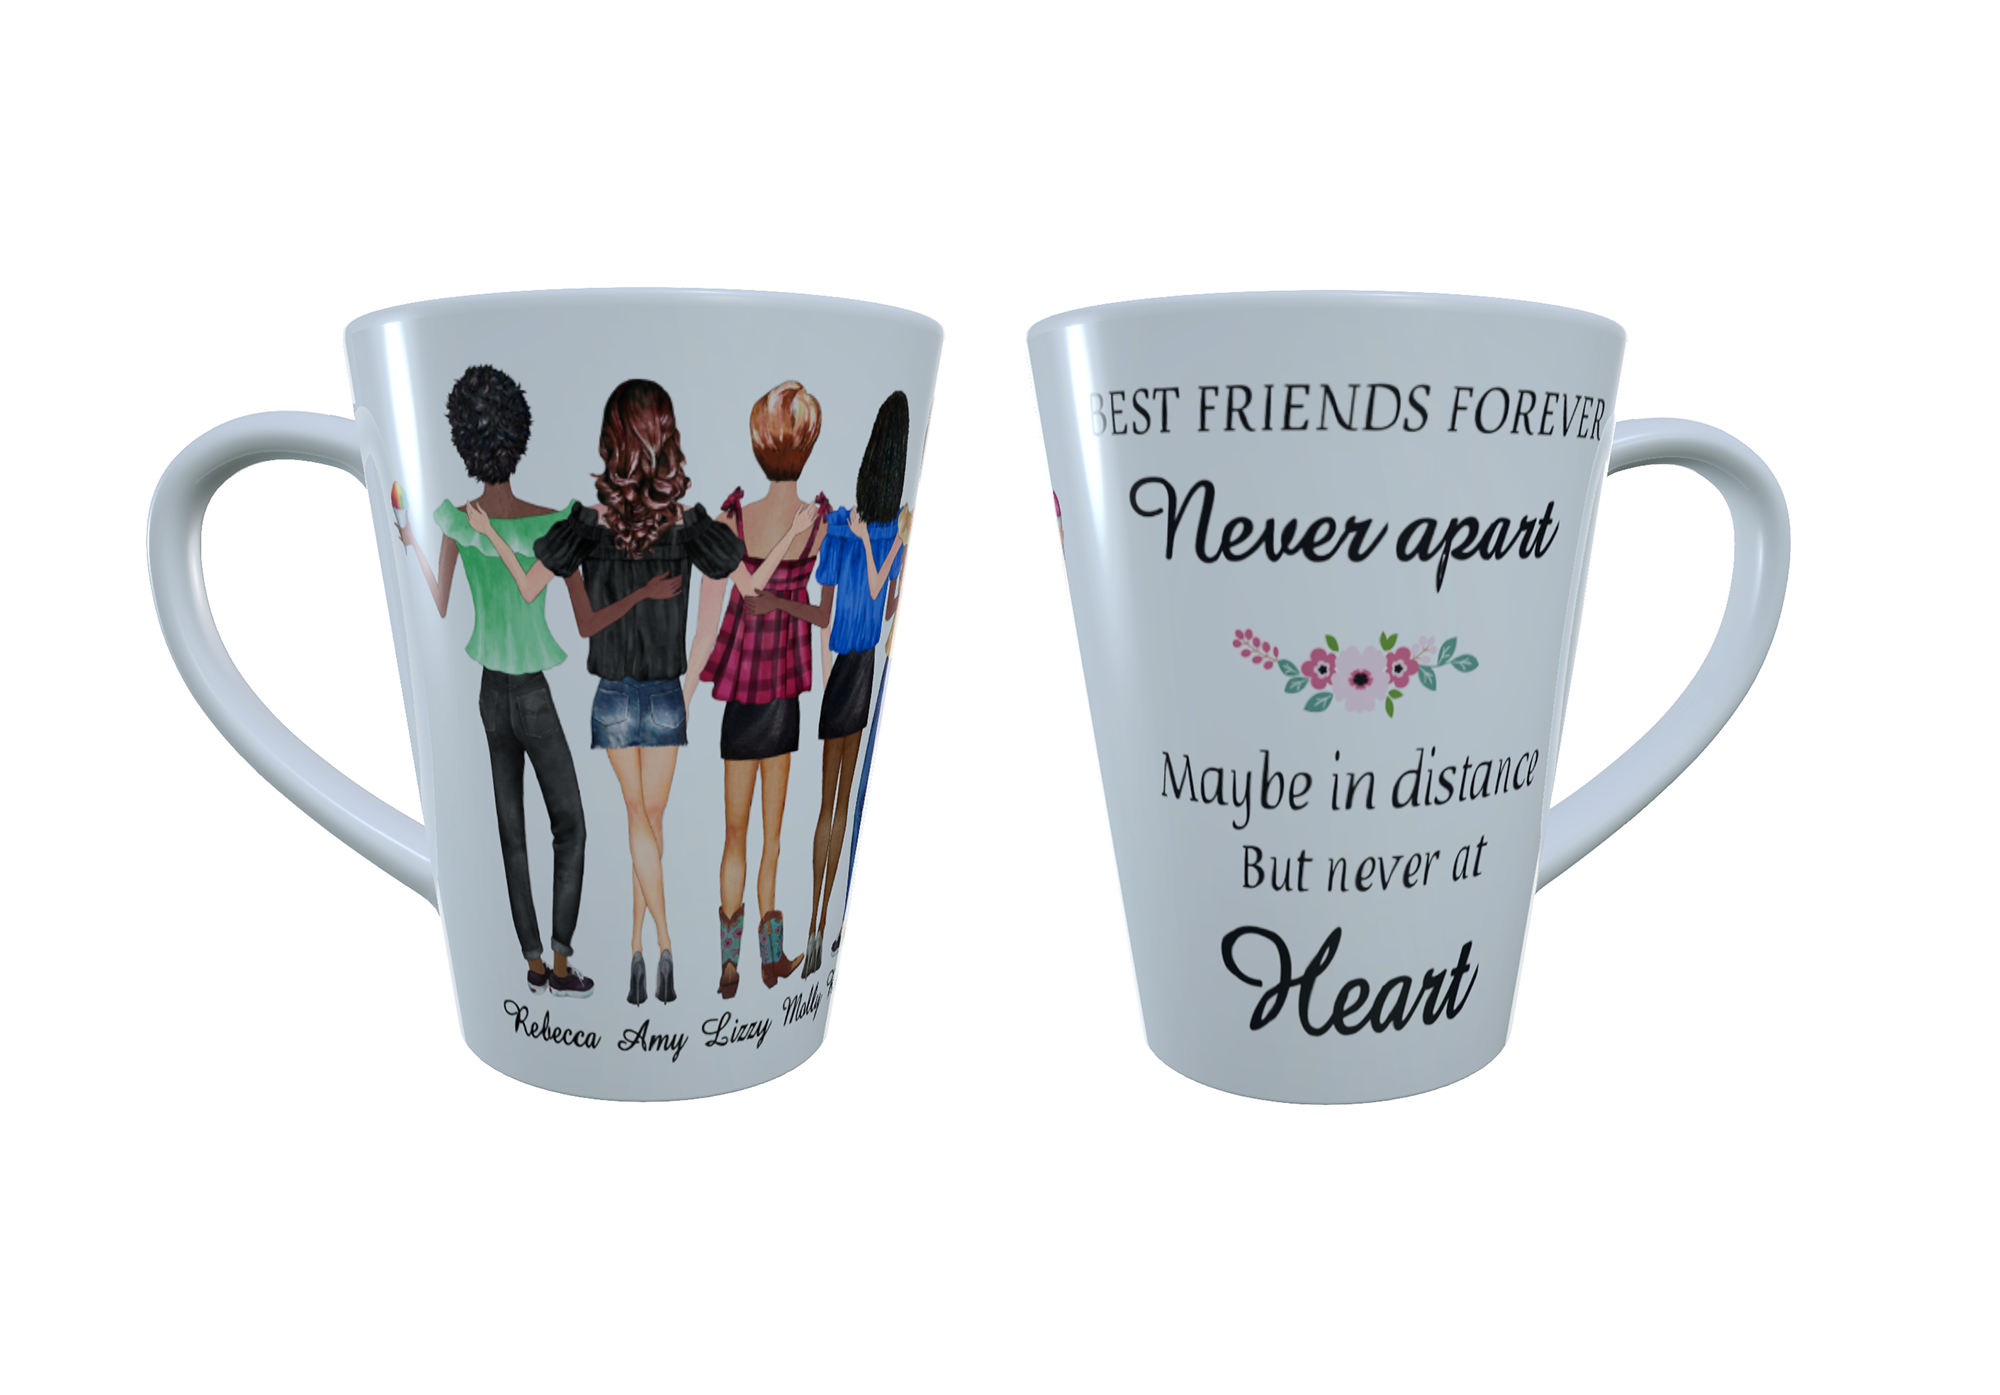 Summer Days Best Friends Forever Latte Mug Custom Best Friends Sdlattebfm 13 00 Dads Cabin For Sisters Mugs Best Friends Mugs And Personalised Printing Custom Printed Just For You